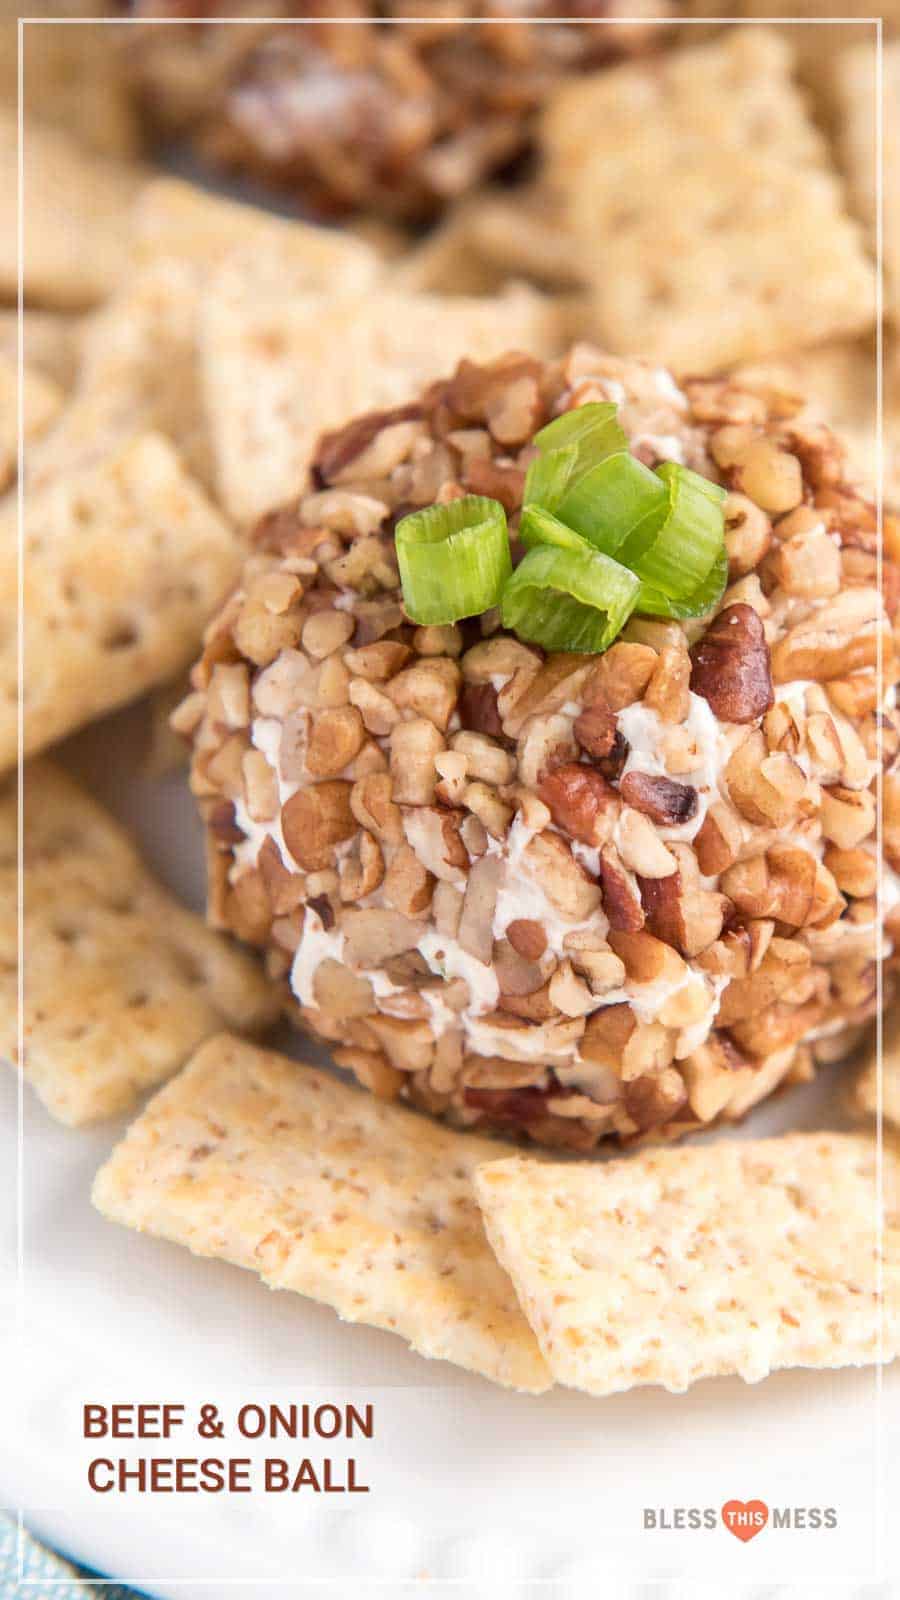 You can never go wrong with a cheese ball, especially when hosting a holiday gathering! Salty, crunchy, and cheesy, it's the perfect appetizer for guests to munch on as they visit with each other. I love how simple they are to throw together, and everyone loves snacking on them before a rich and hearty meal. #cheeseball #homemadecheeseball #cheeseballrecipe #easycheeseball #easyappetizer #partyappetizer #holidayappetizer